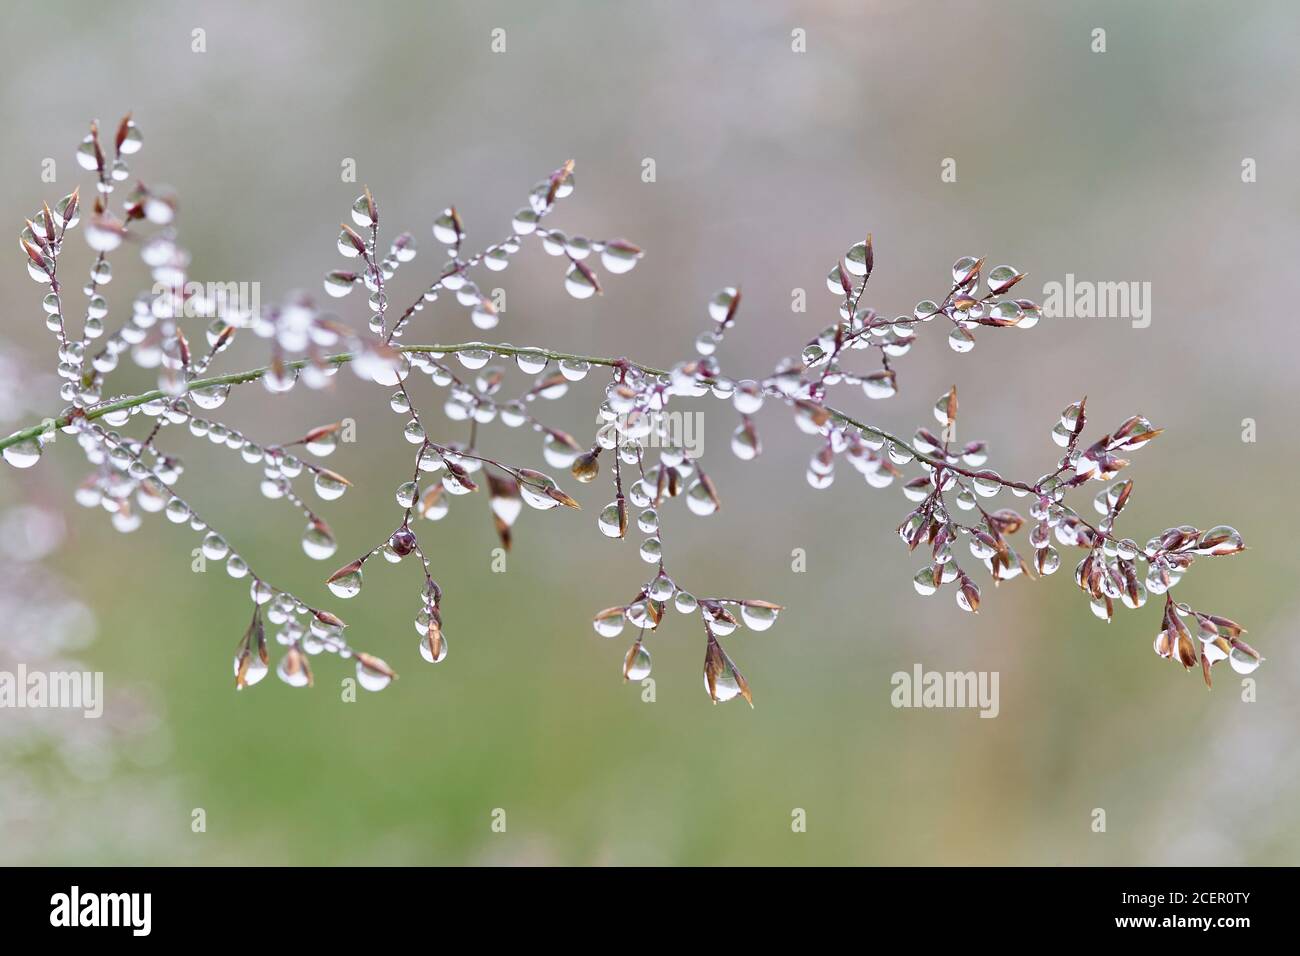 Dew covered grass. Stock Photo